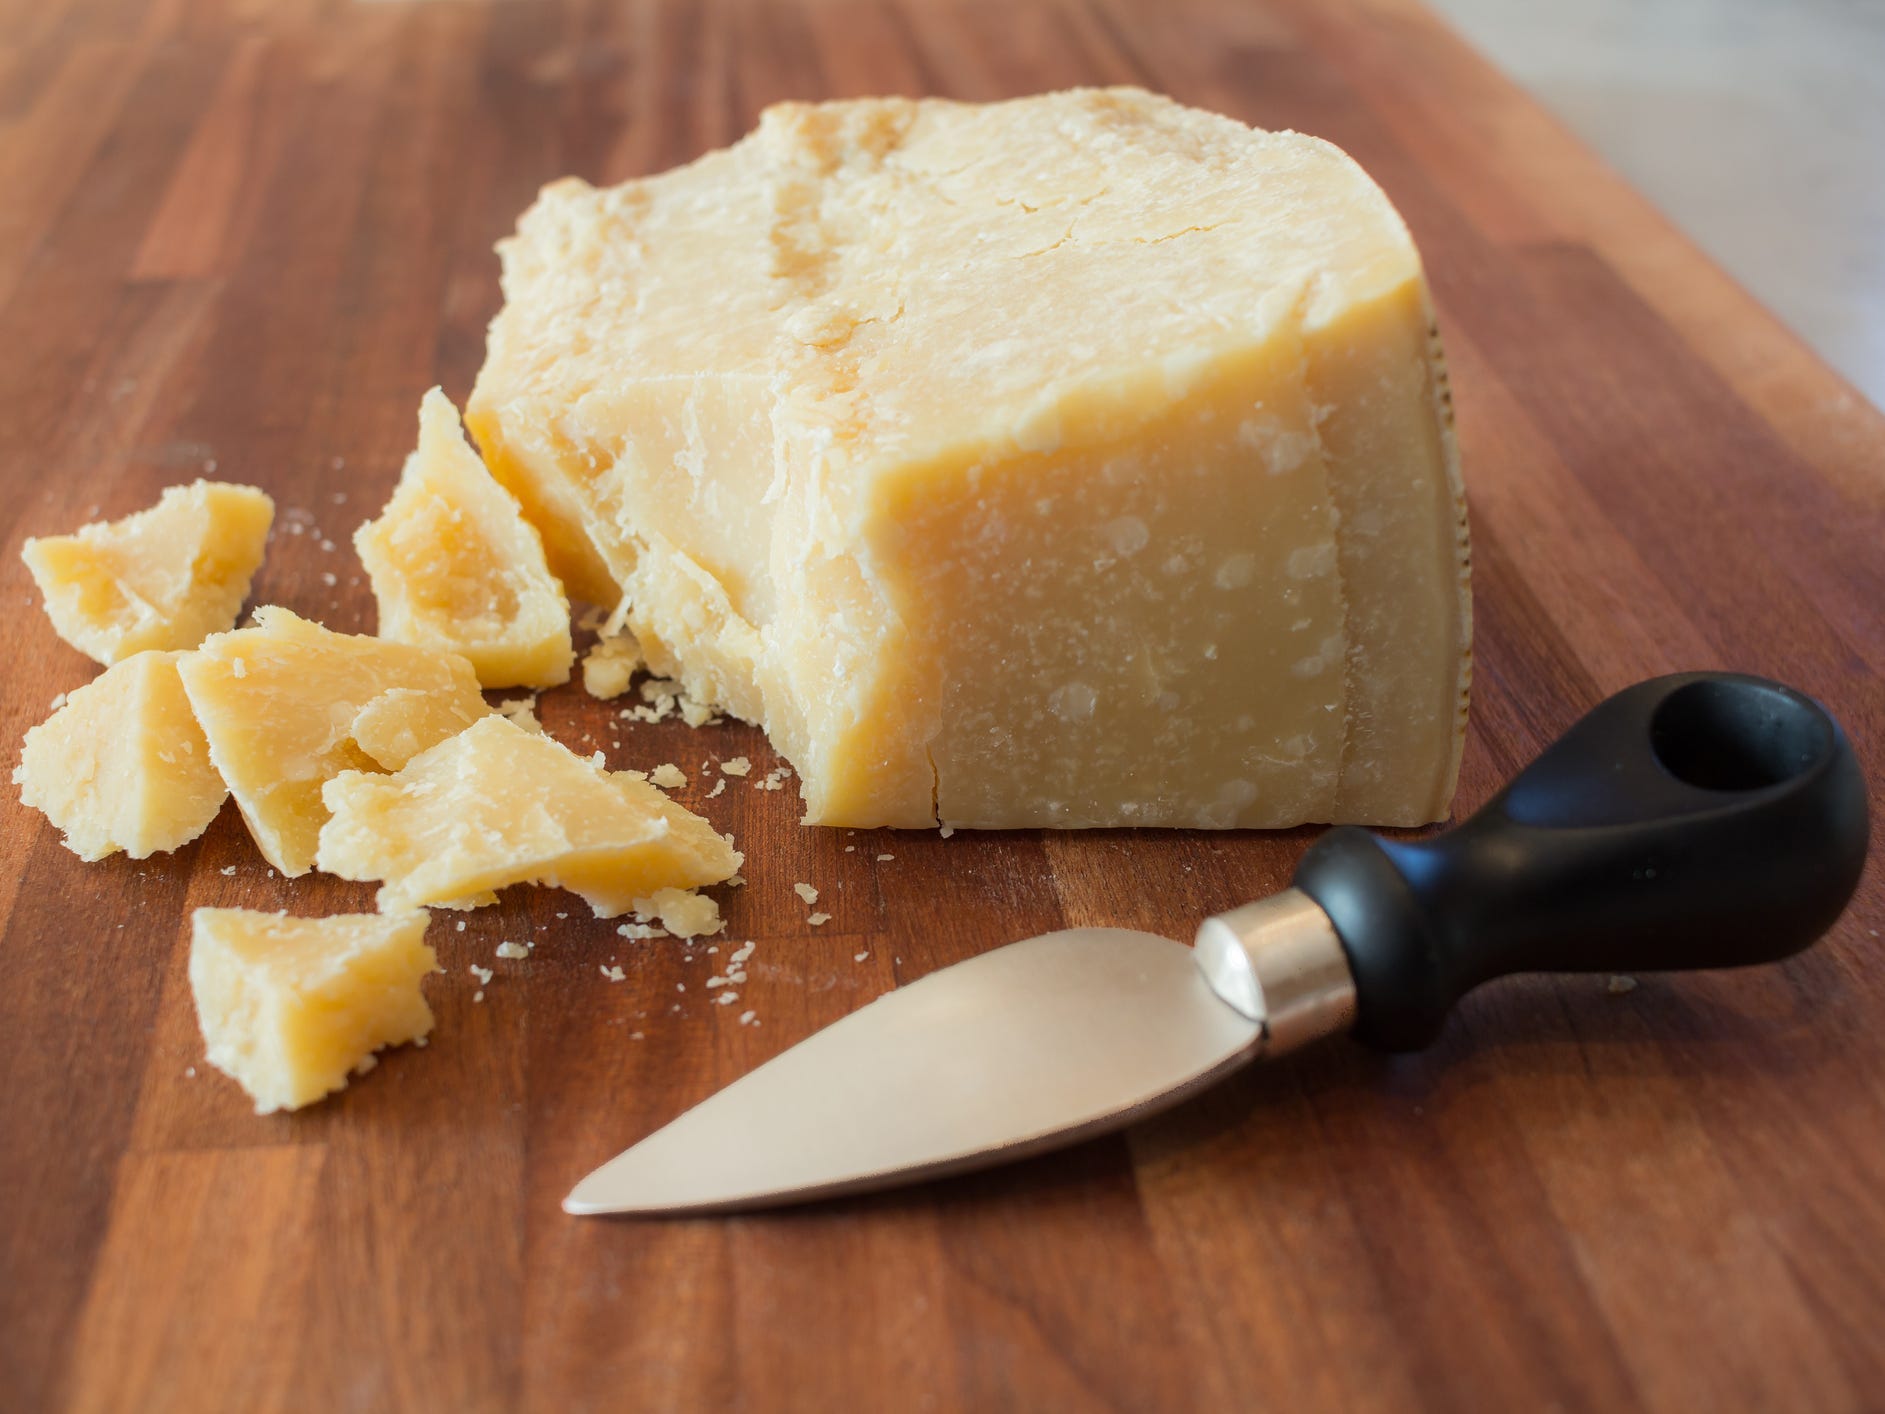 A wedge of Parmigiano Reggiano broken into chunks with a cheese knife sitting in front